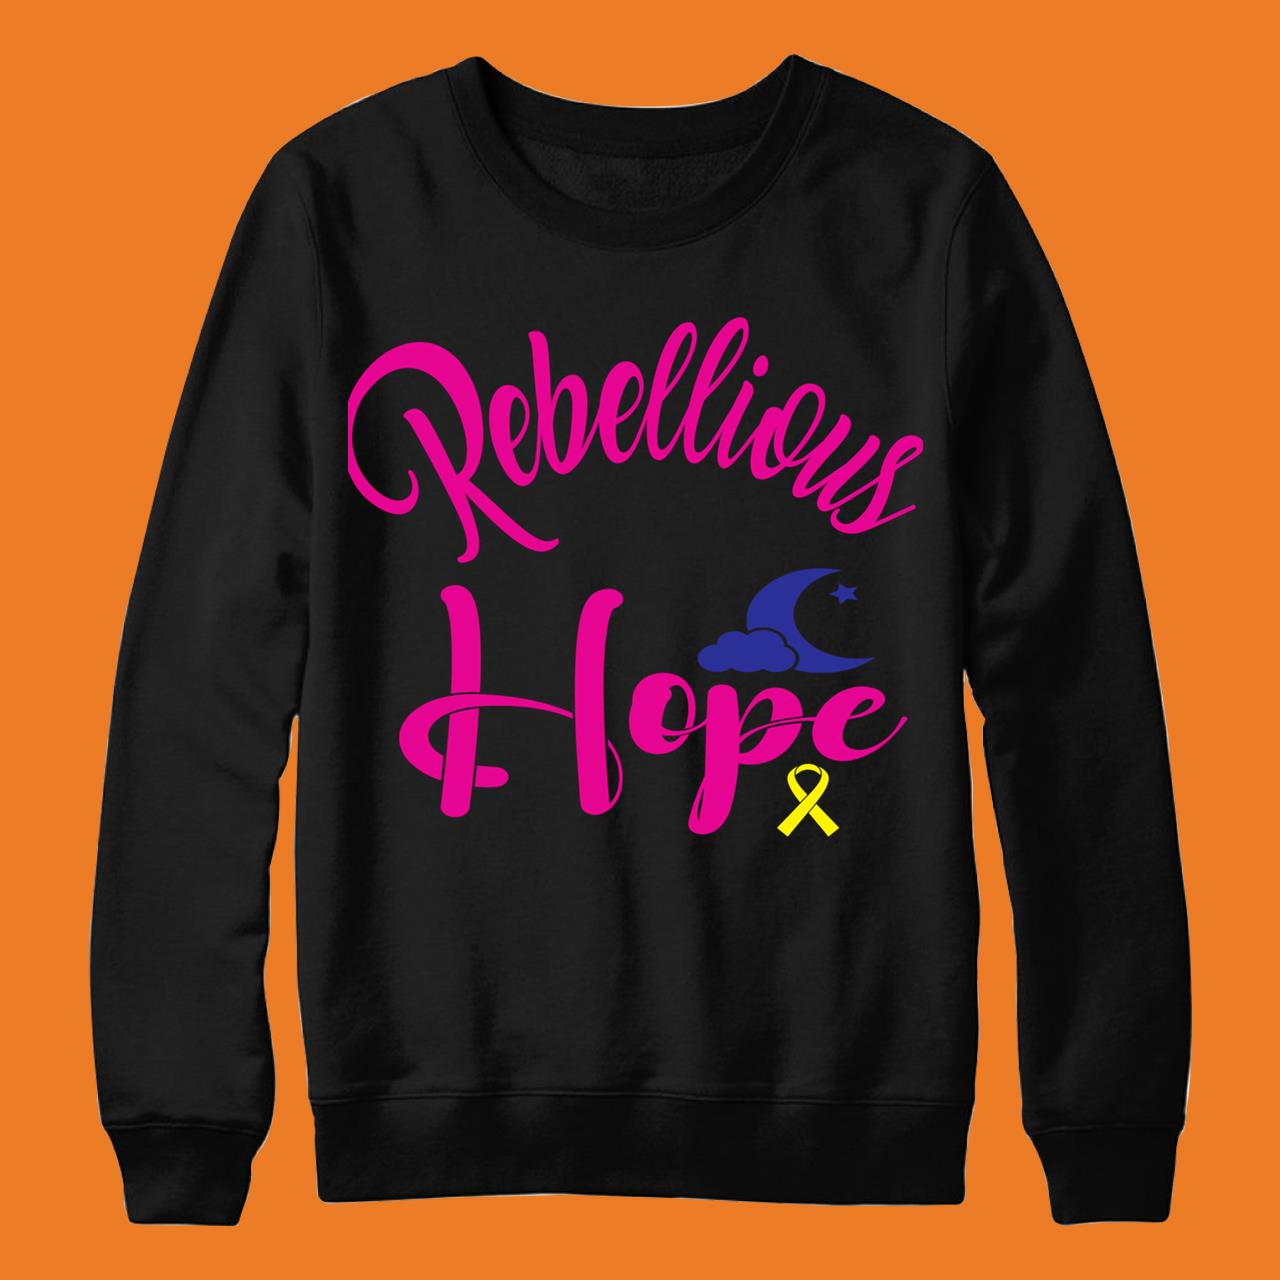 Rebellious Hope – Bowel Babe Relaxed Fit T-Shirt